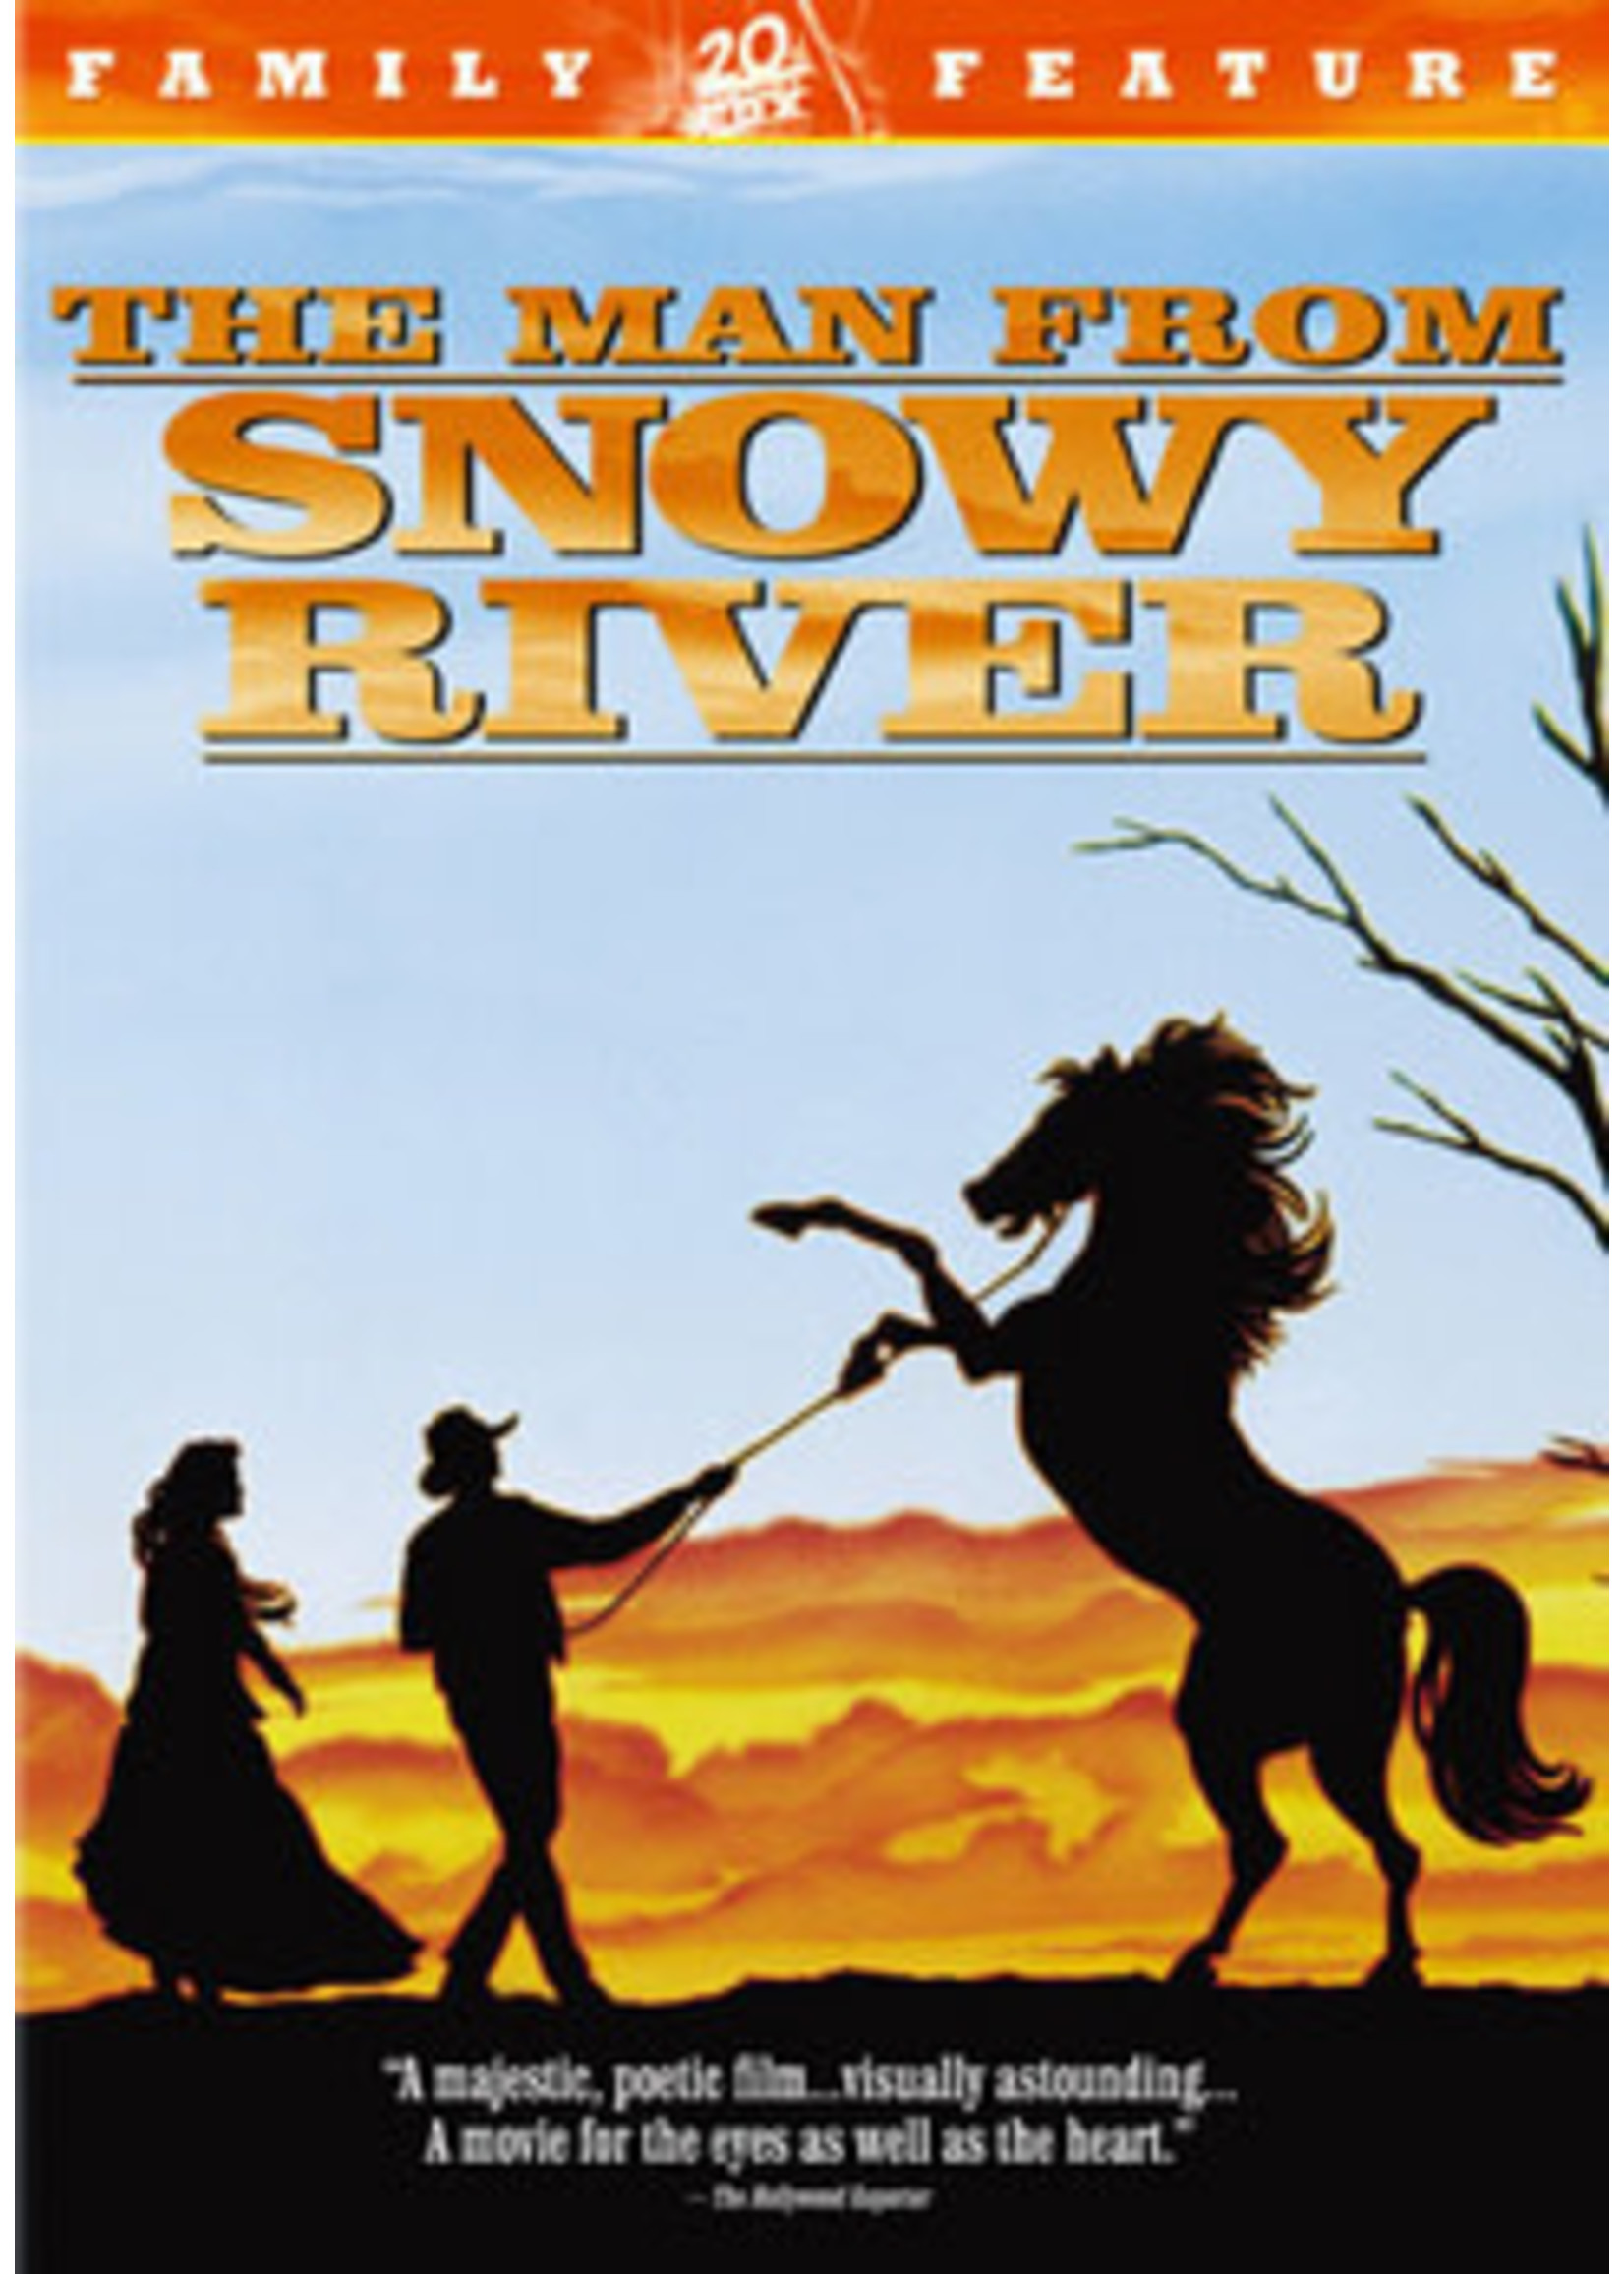 The Man from Snowy River (DVD)